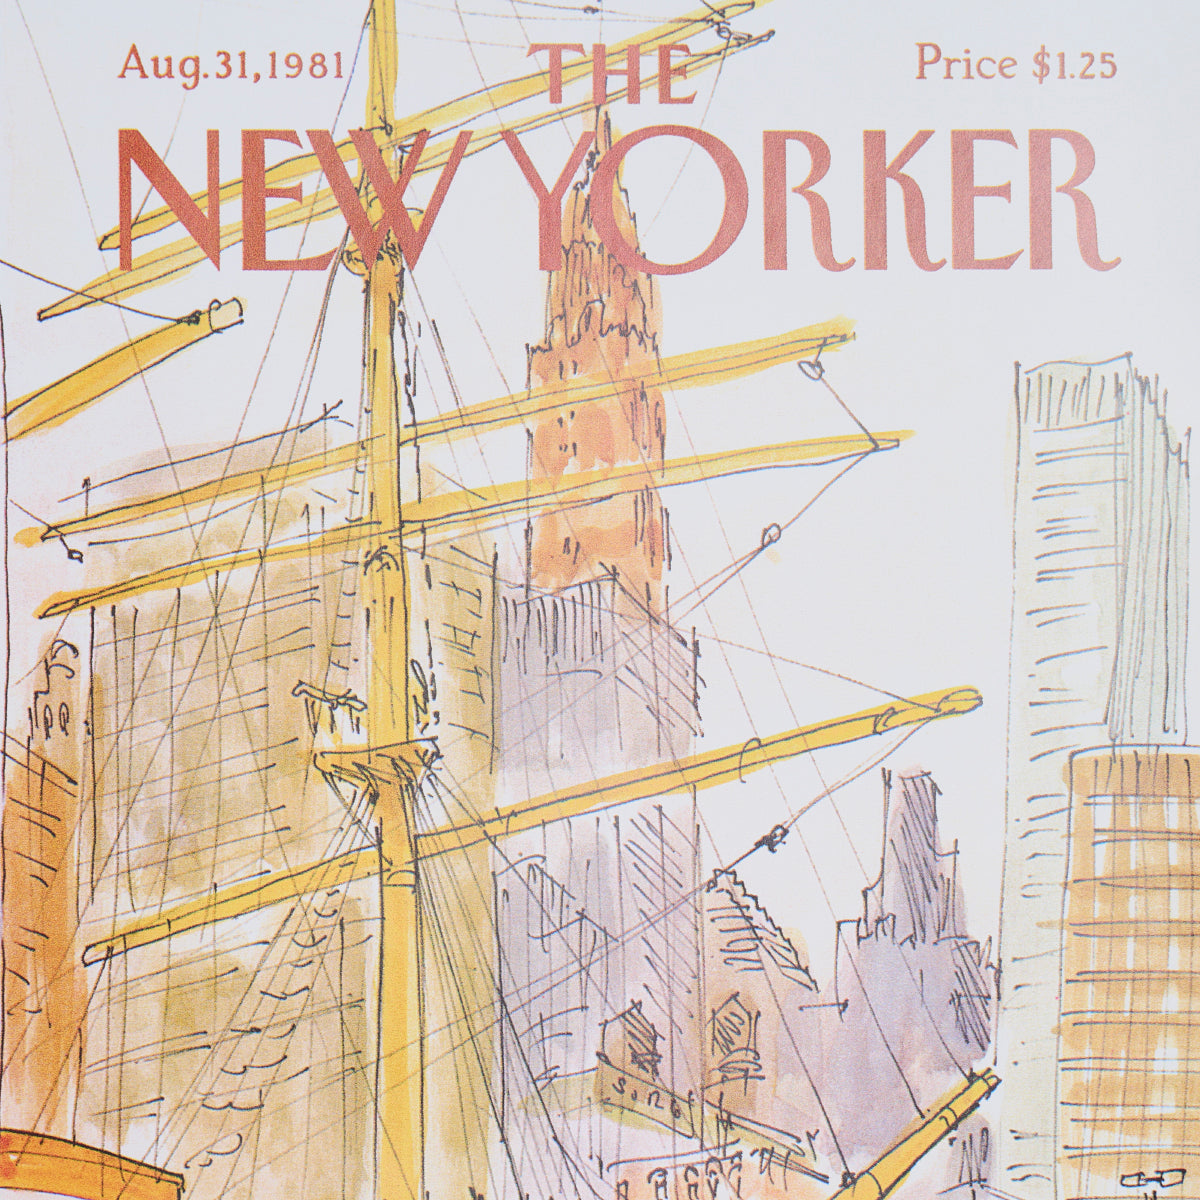 THE NEW YORKER CITY-VIEW COVERS | MULTICOLOR